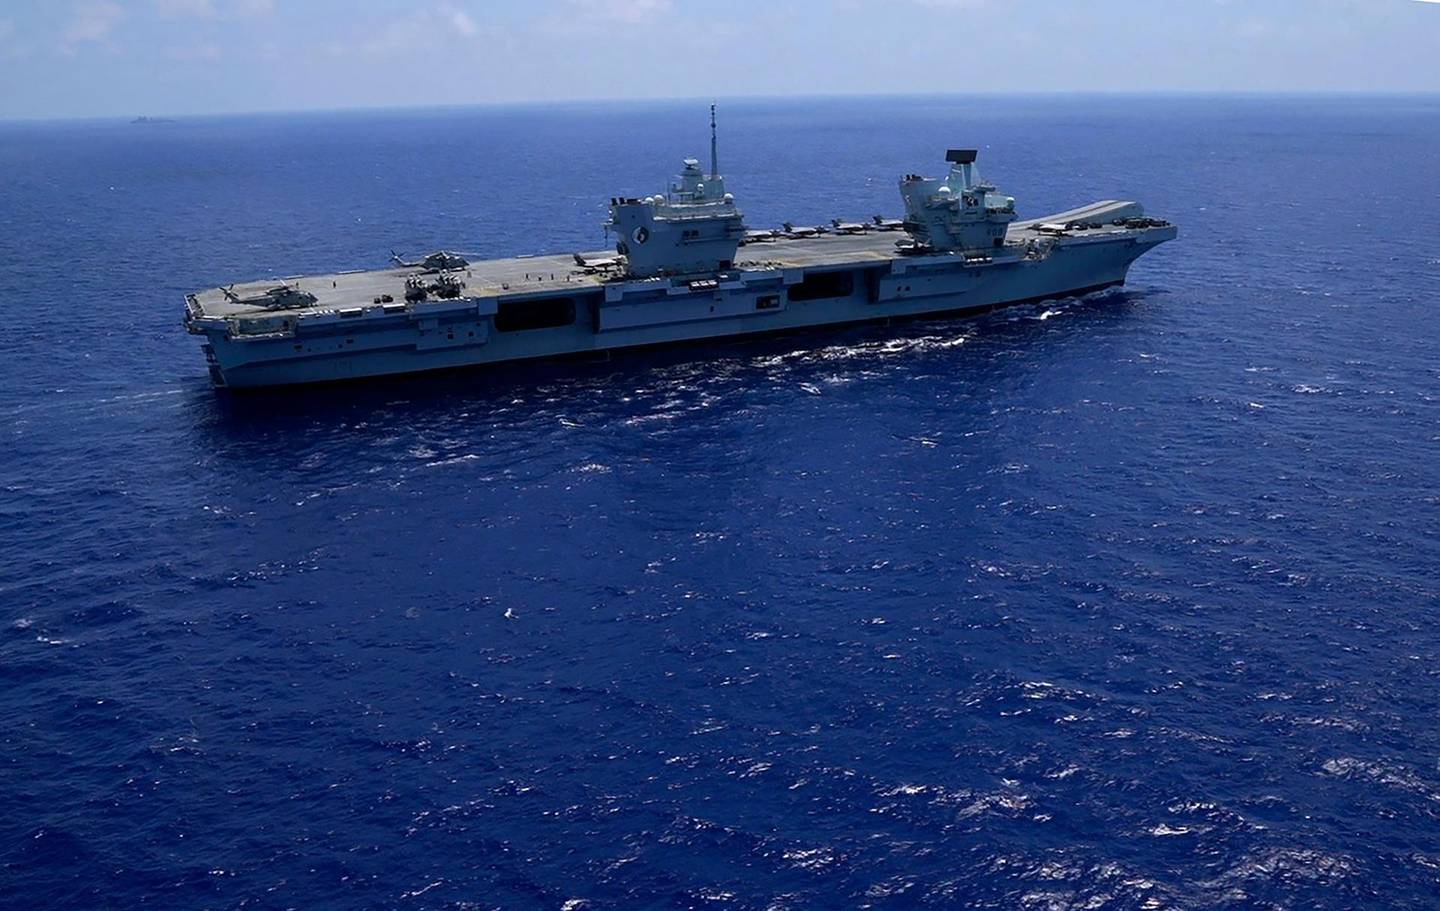 U.K.'s newest aircraft carrier HMS Queen Elizabeth in the Mediterranean Sea on Sunday, June 20, 2021. The British Royal Navy commanders say the U.K.'s newest aircraft carrier HMS Queen Elizabeth is helping to take on the "lion's share" of operations against the Islamic State group in Iraq as Russian warplanes get an up-close look at the cutting-edge F-35 jet in a "cat-and-mouse" game with British and U.S. pilots. (AP Photo/Petros Karadjias)